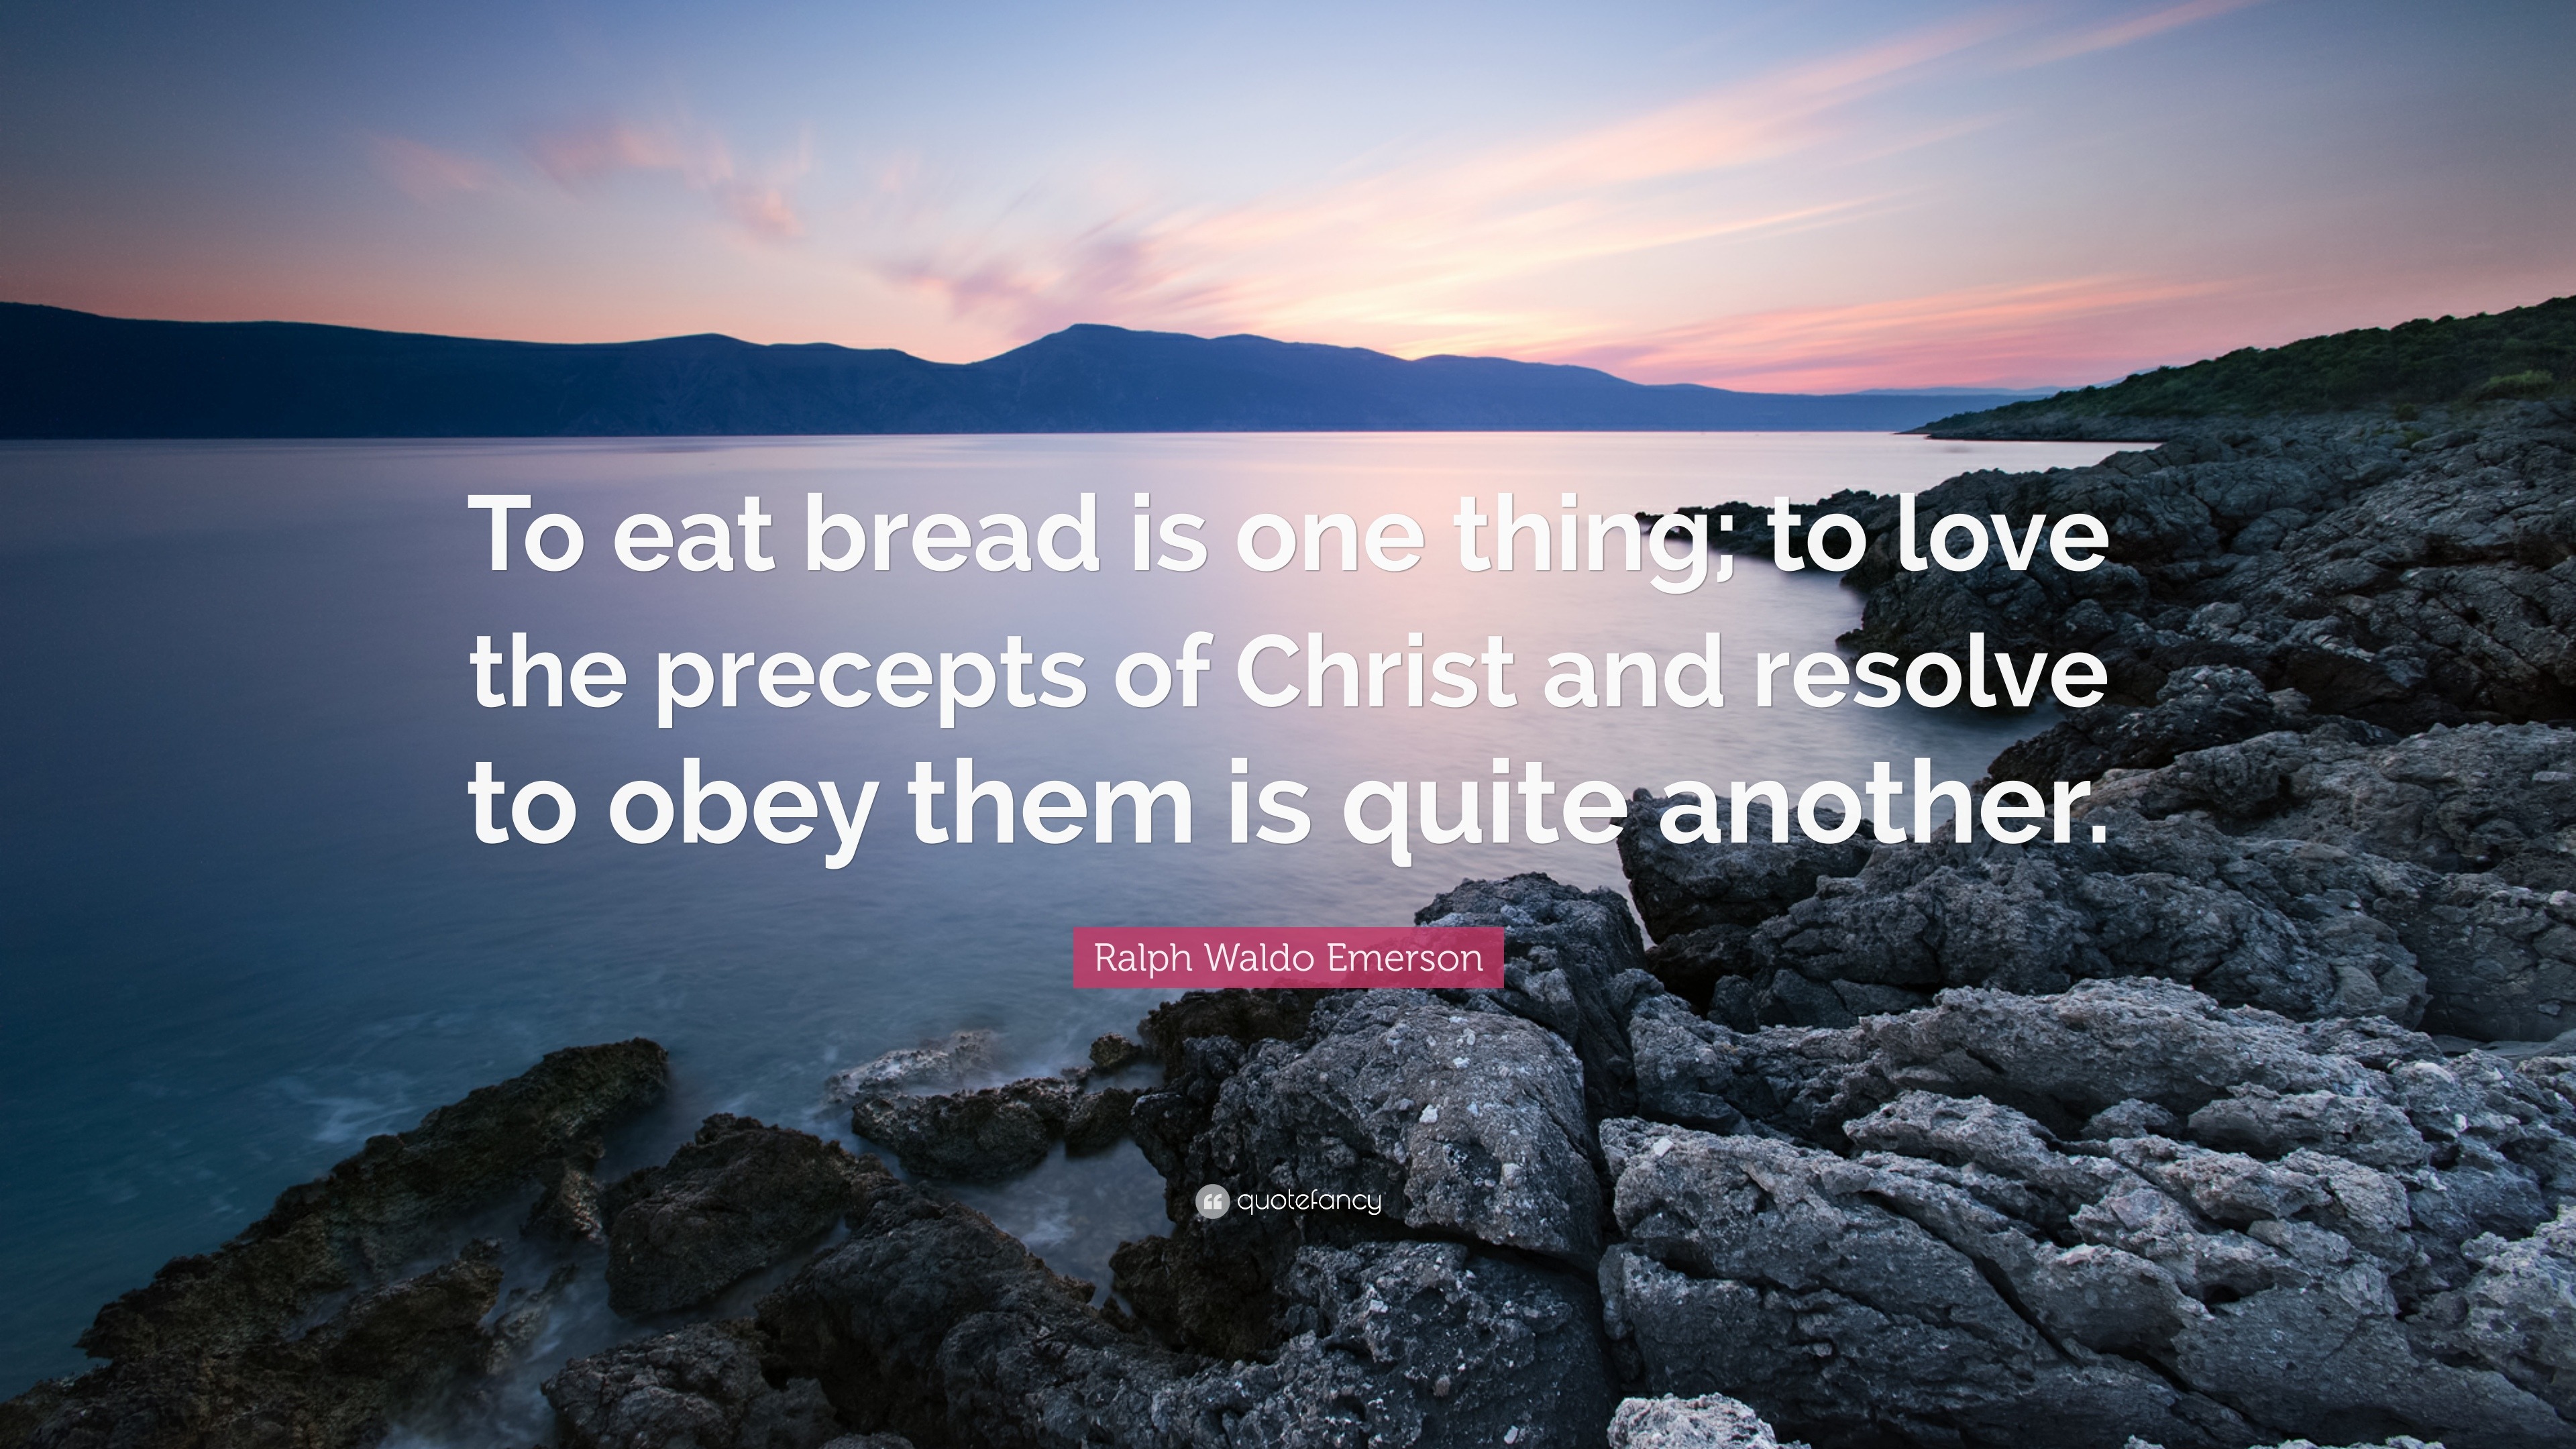 Ralph Waldo Emerson Quote “To eat bread is one thing to love the